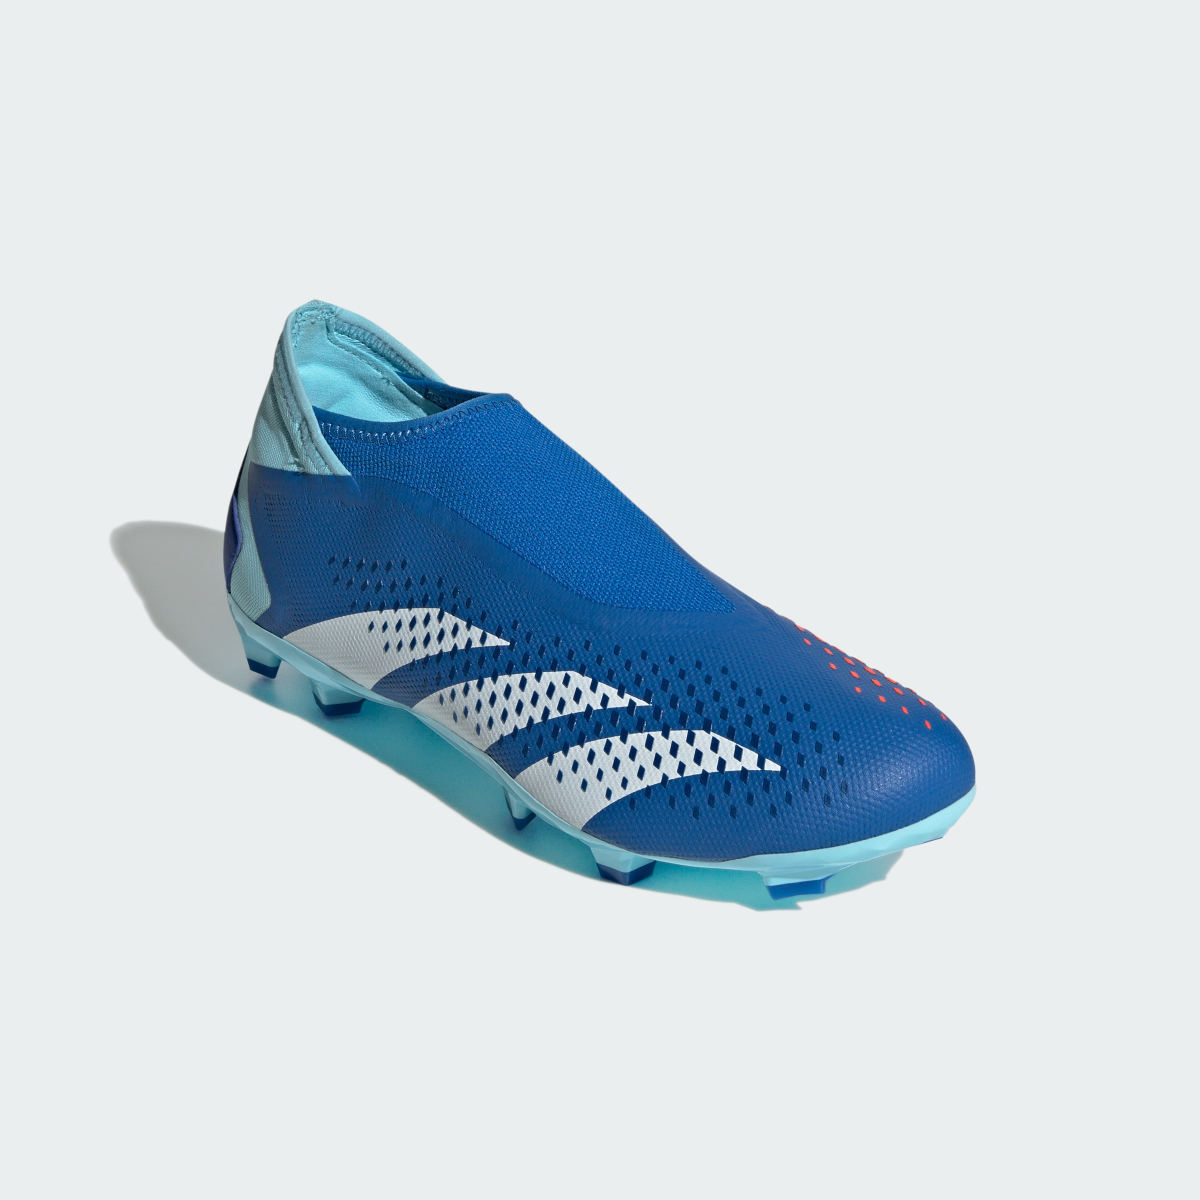 Adidas Predator Accuracy.3 Laceless Firm Ground Cleats. 5